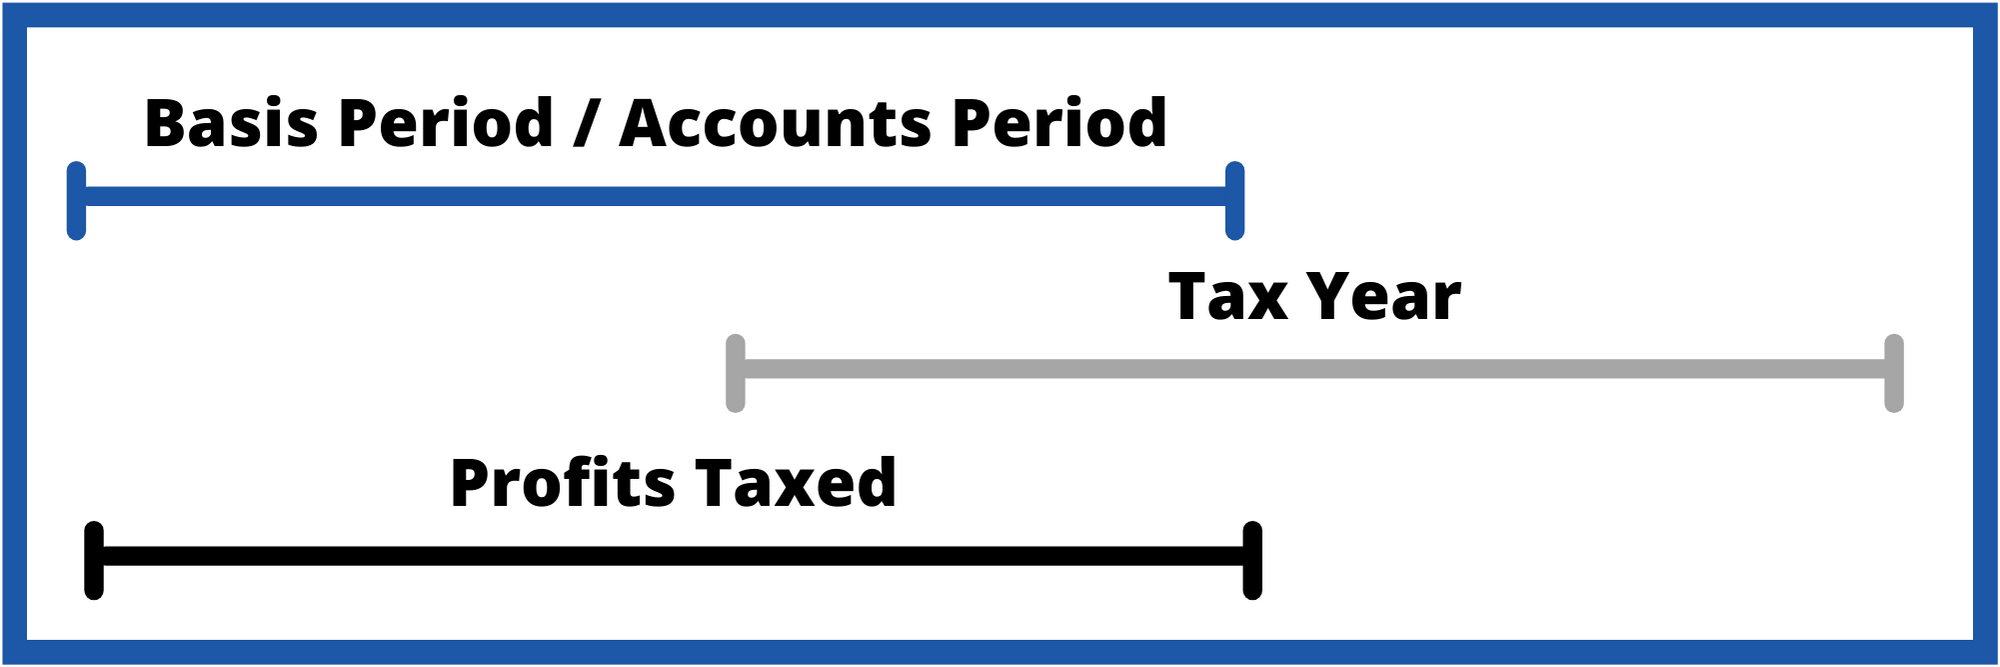 Timeline showing that the Basis period and profits taxed line up to be taxed in the following tax year.